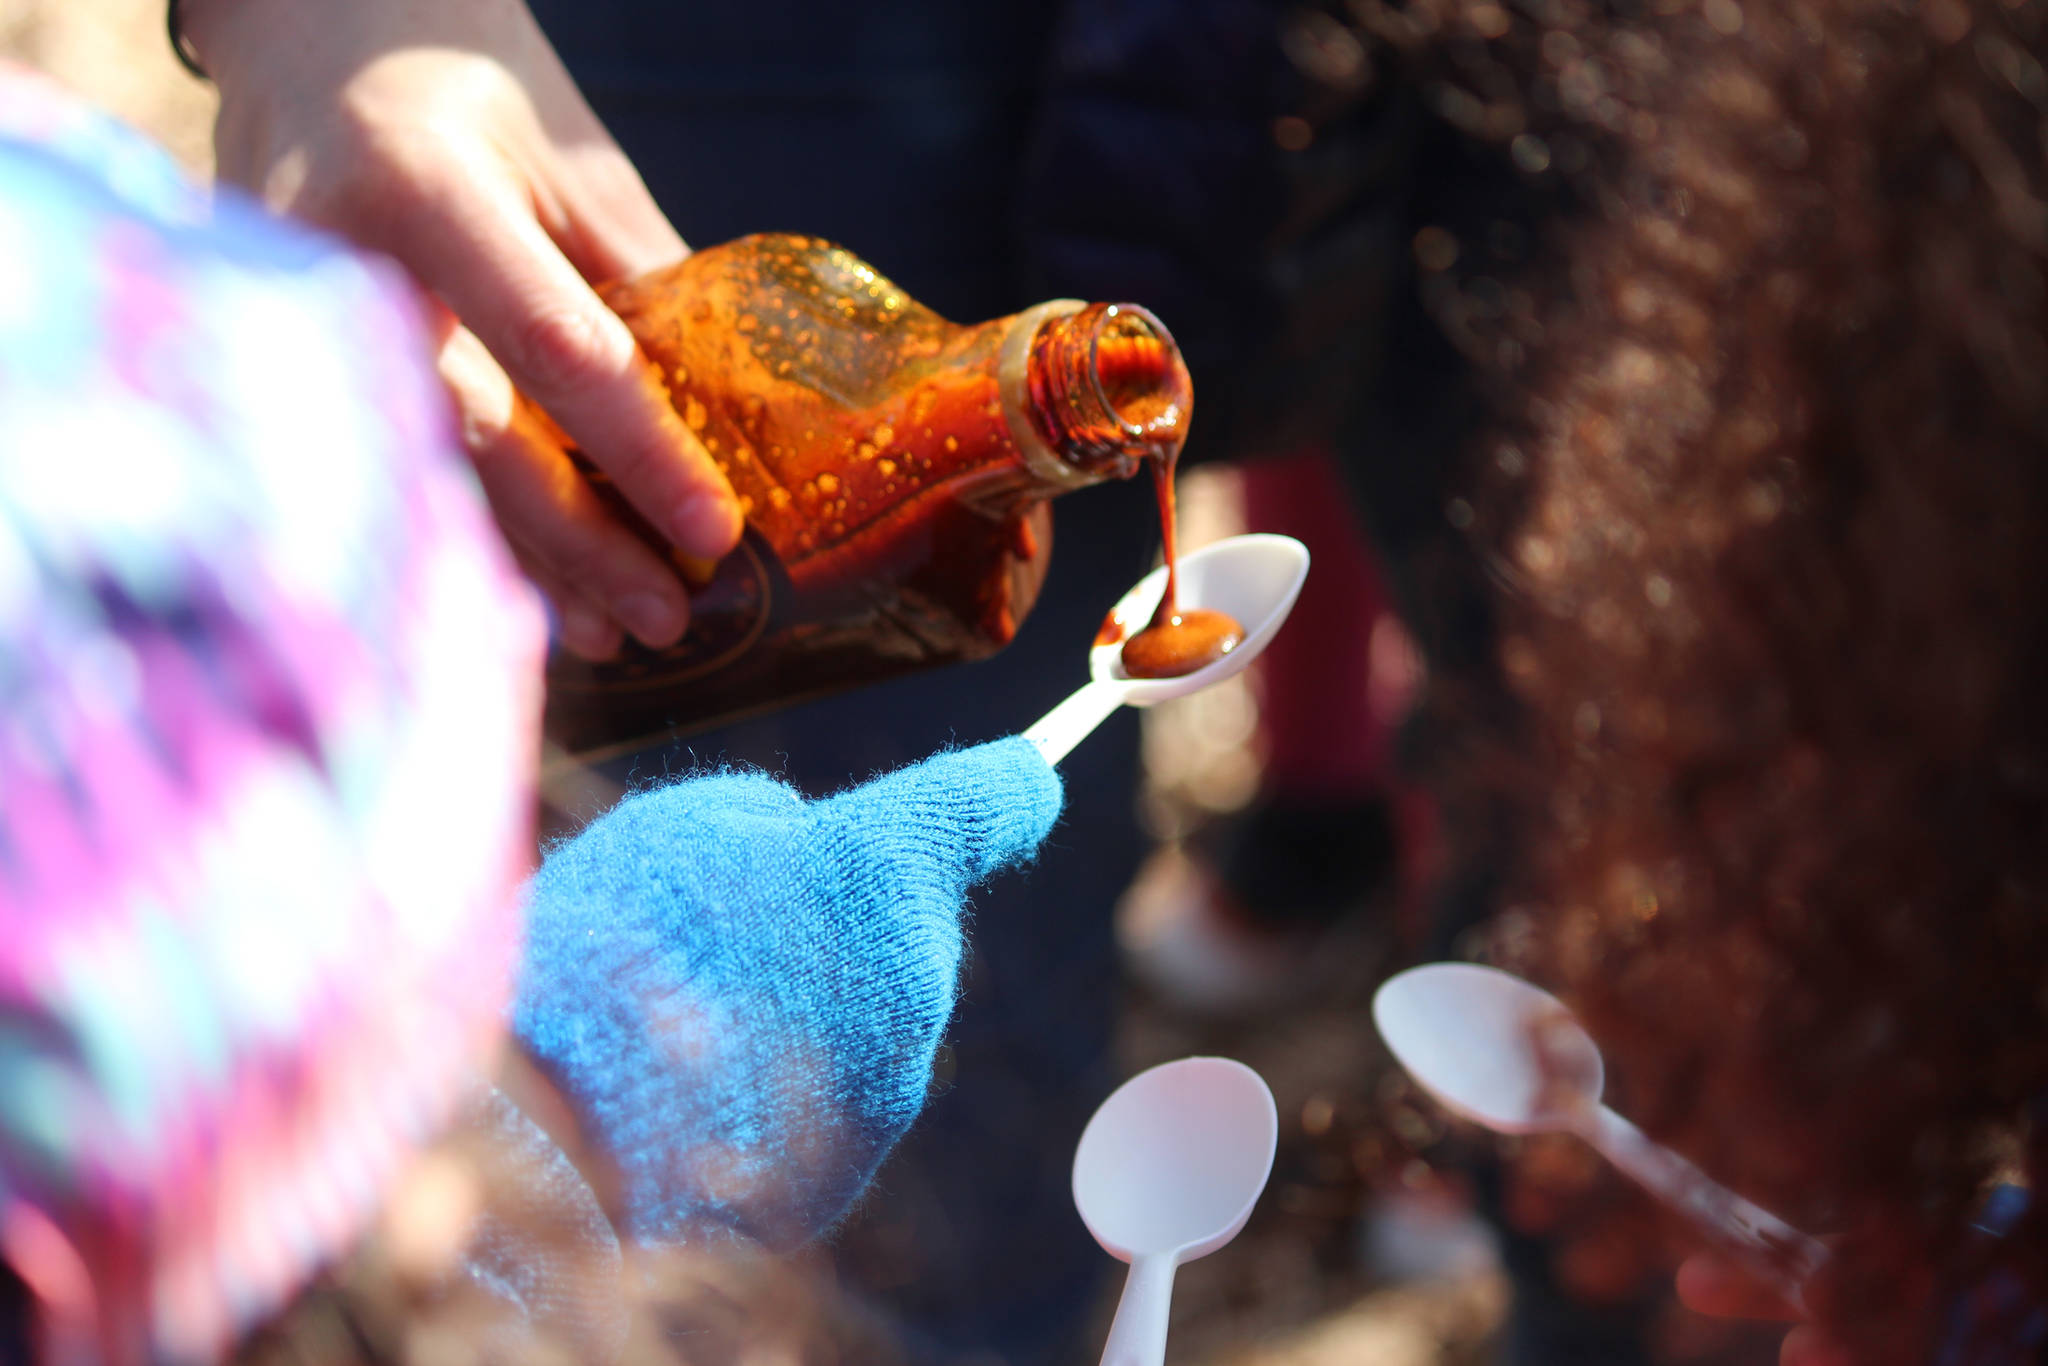 First grade students from Paul Banks Elementary School line up for a taste of Bridge Creek Birch Syrup during a Friday, April 12, 2019 field trip to the grove where the company taps for sap off East End Road in Homer, Alaska. (Photo by Megan Pacer/Homer News)